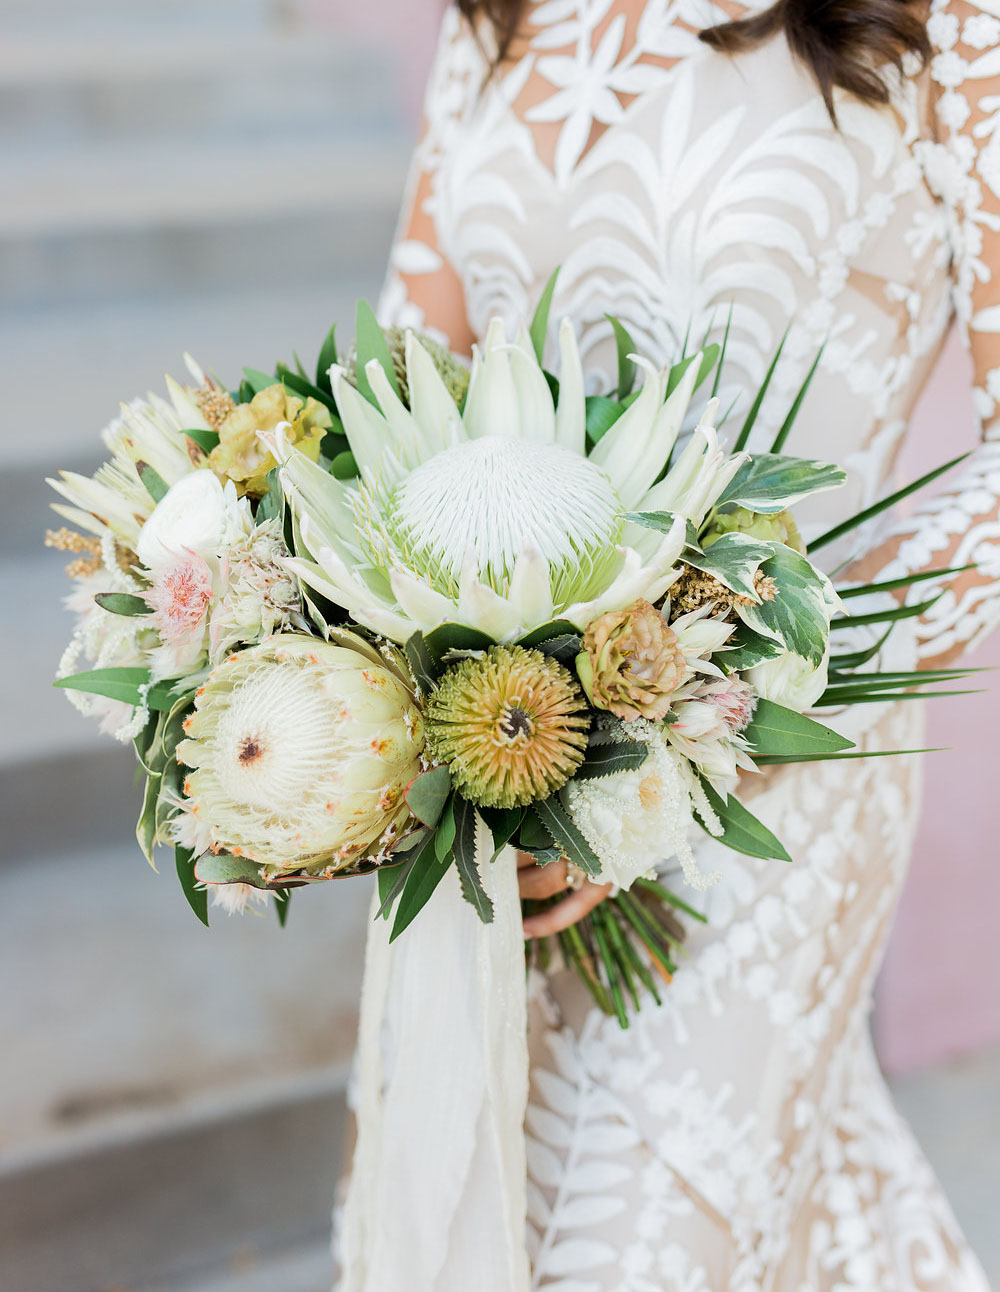 The bridal bouquet was done with king proteas, greenery and astilbe